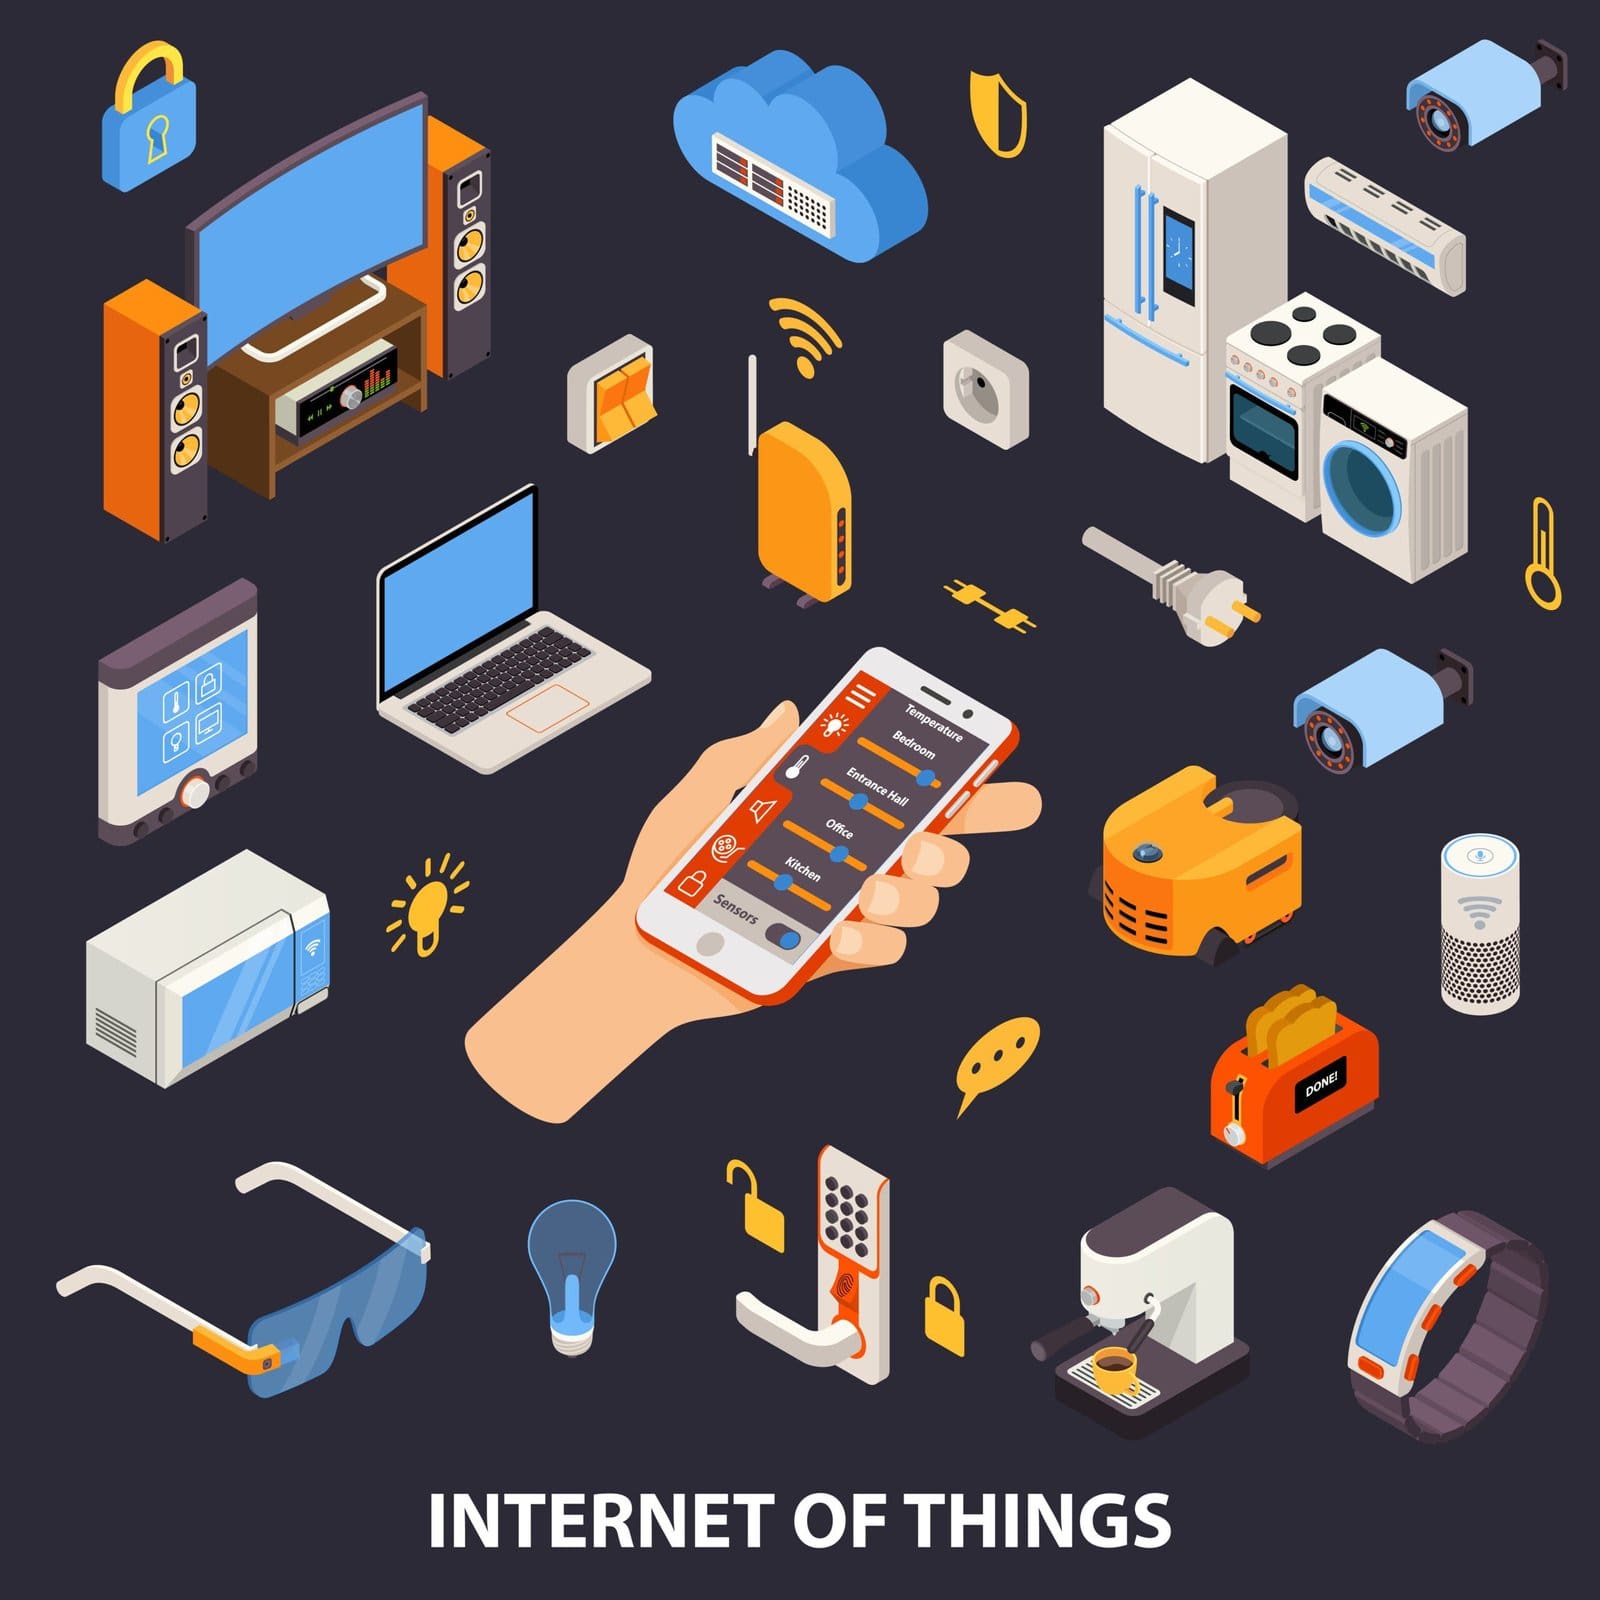 What Is The Internet Of Things (IoT) And Its Connection To Home Automation?